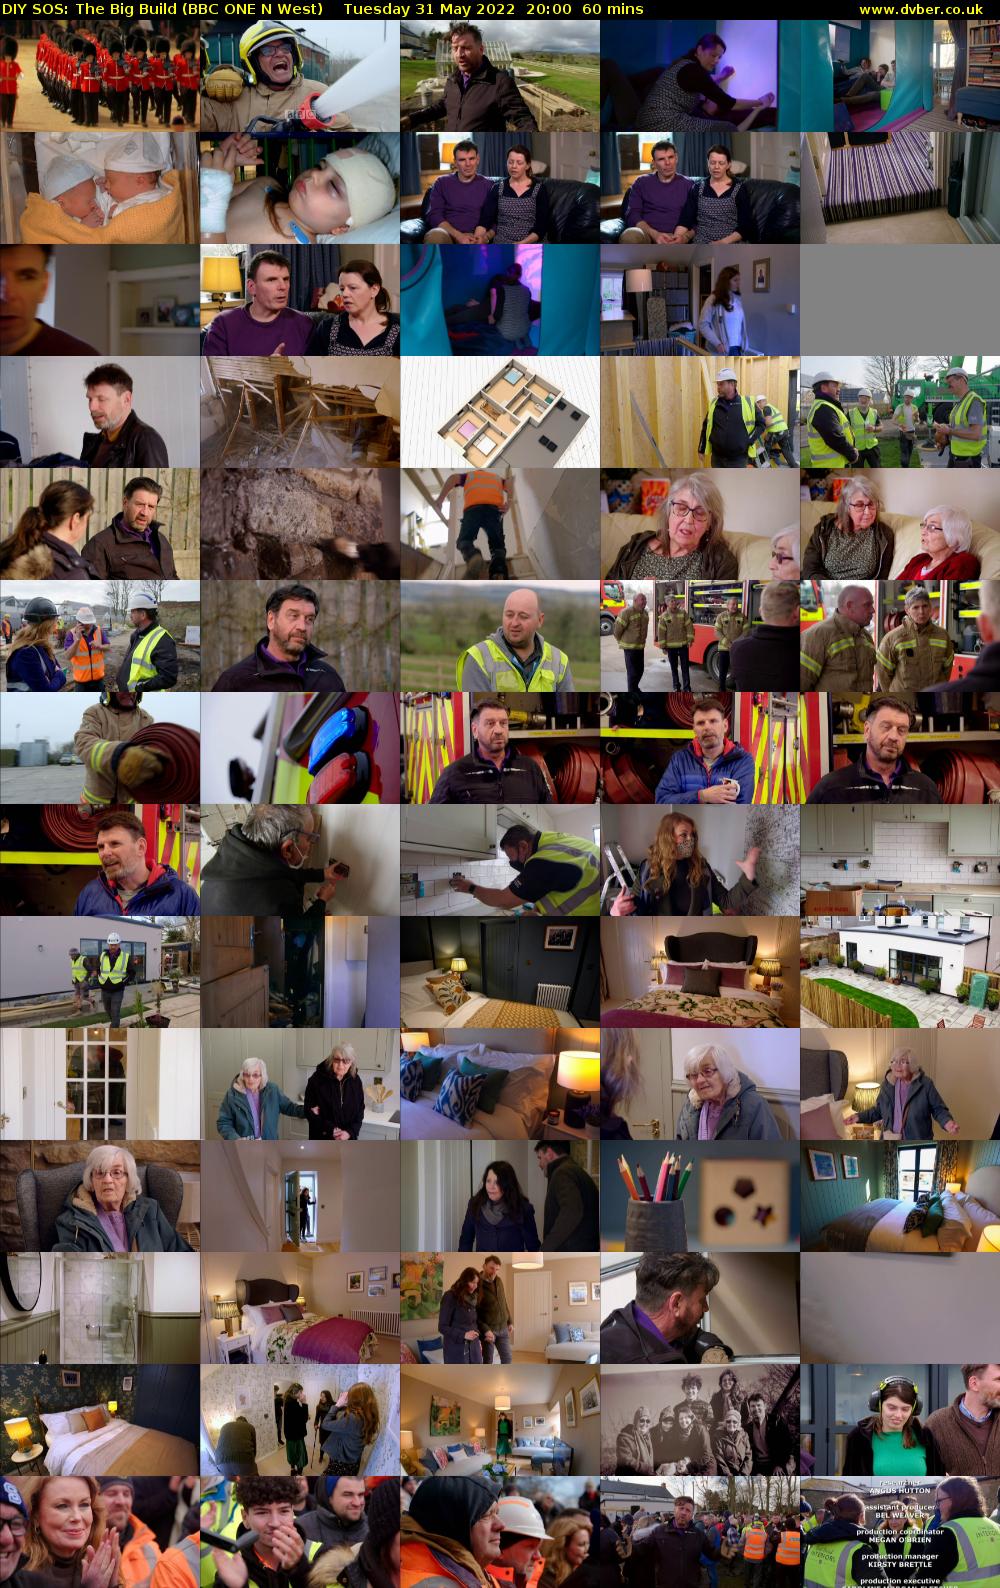 DIY SOS: The Big Build (BBC ONE N West) Tuesday 31 May 2022 20:00 - 21:00